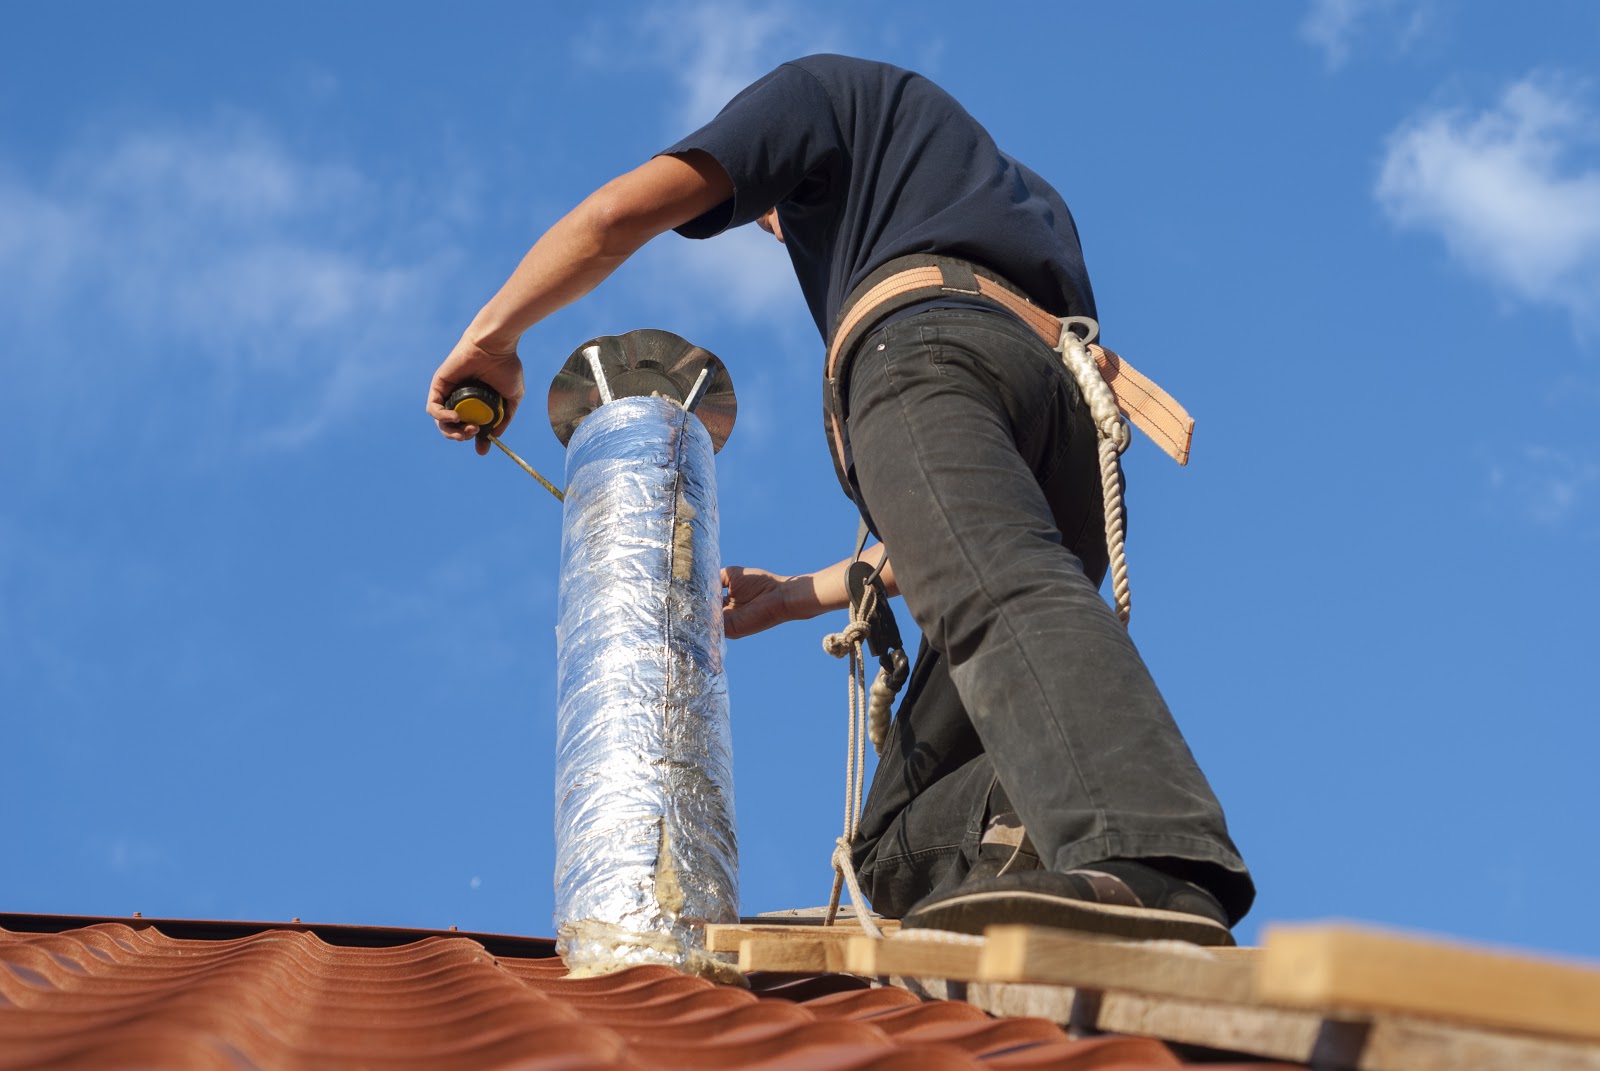 How to Install Vent Pipe Flashing on an Existing Roof - Tools